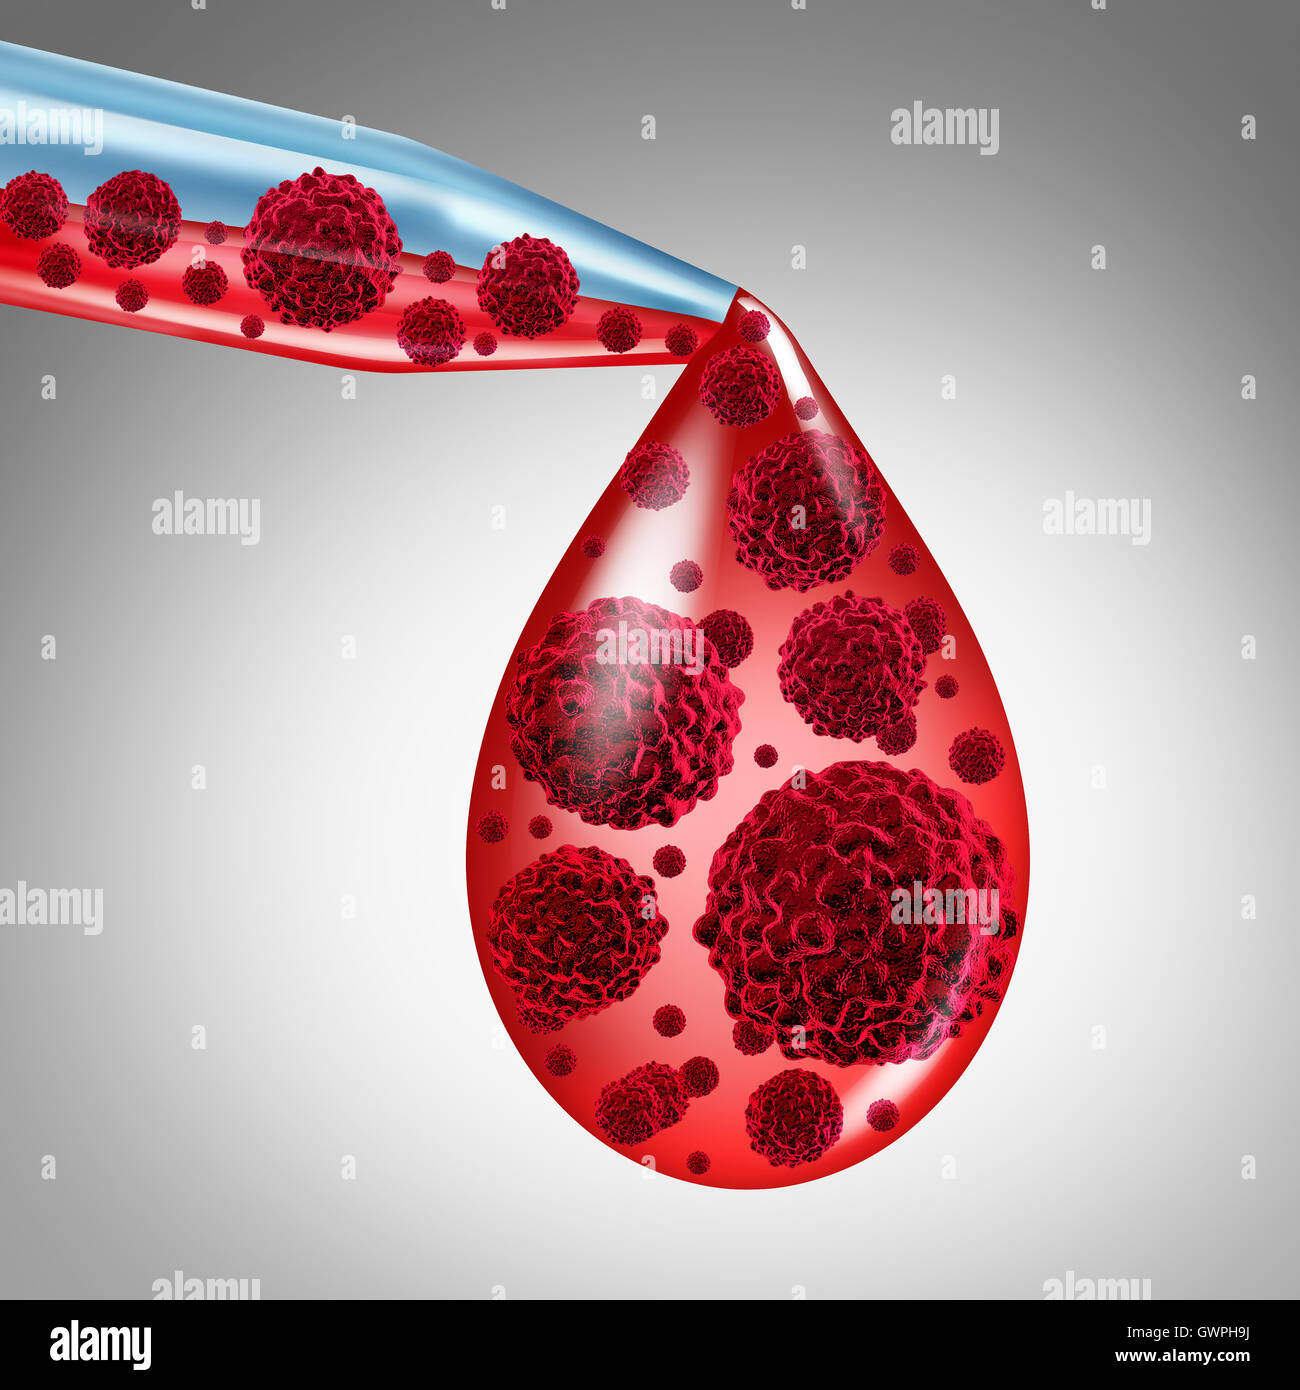 Blood cancer medical diagnosis concept as an eye dropper with blood infected with malignant cell as a conceptual symbol for leukemia symptoms or disease of the blood as a 3D illustration. Stock Photo